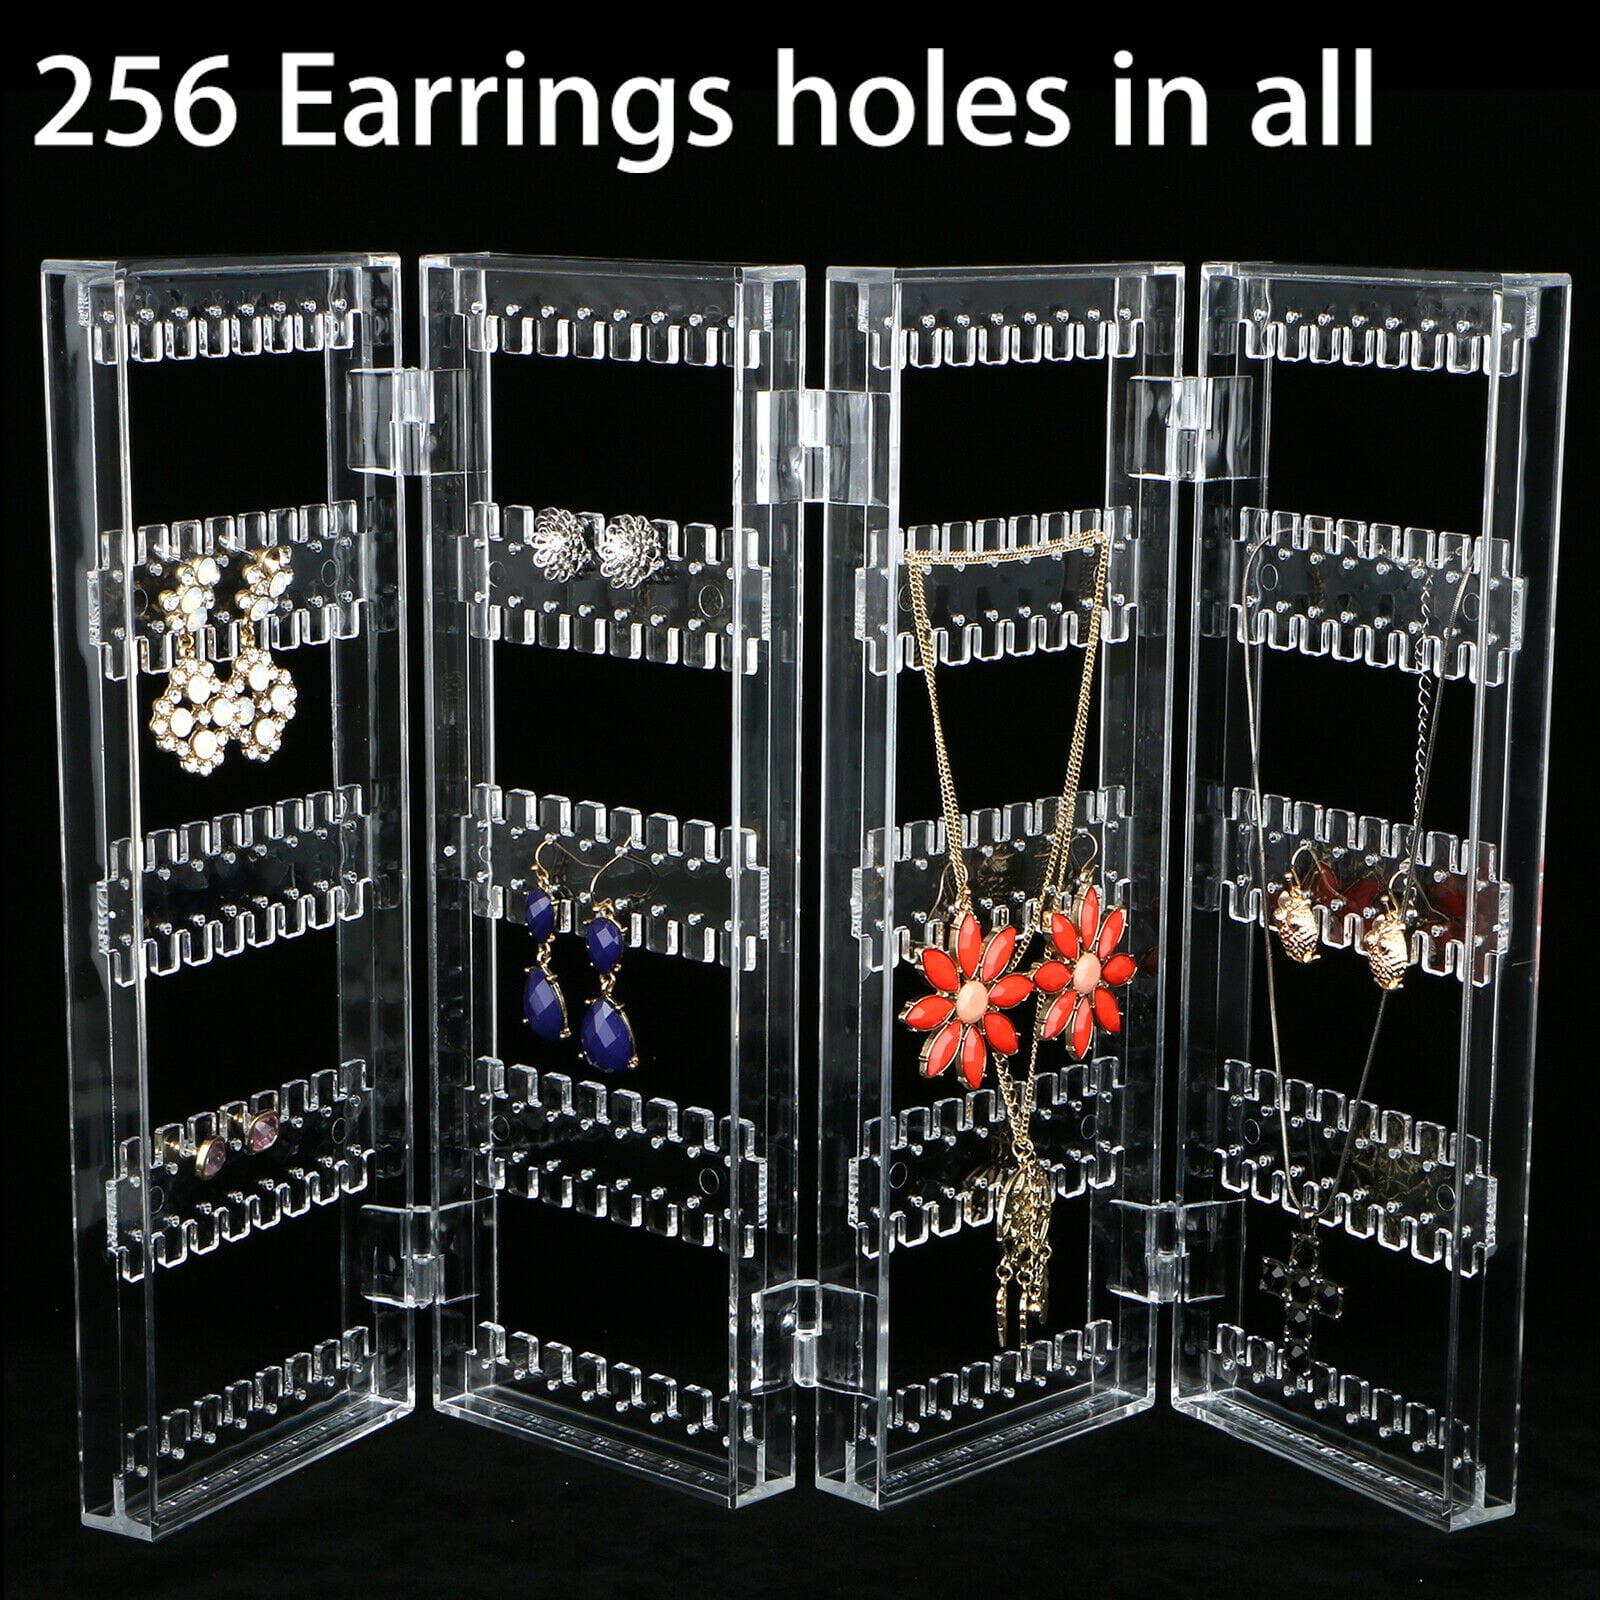 Earrings Ear Studs Necklace Chain Jewelry Display Holder Stand Organizer Rack 